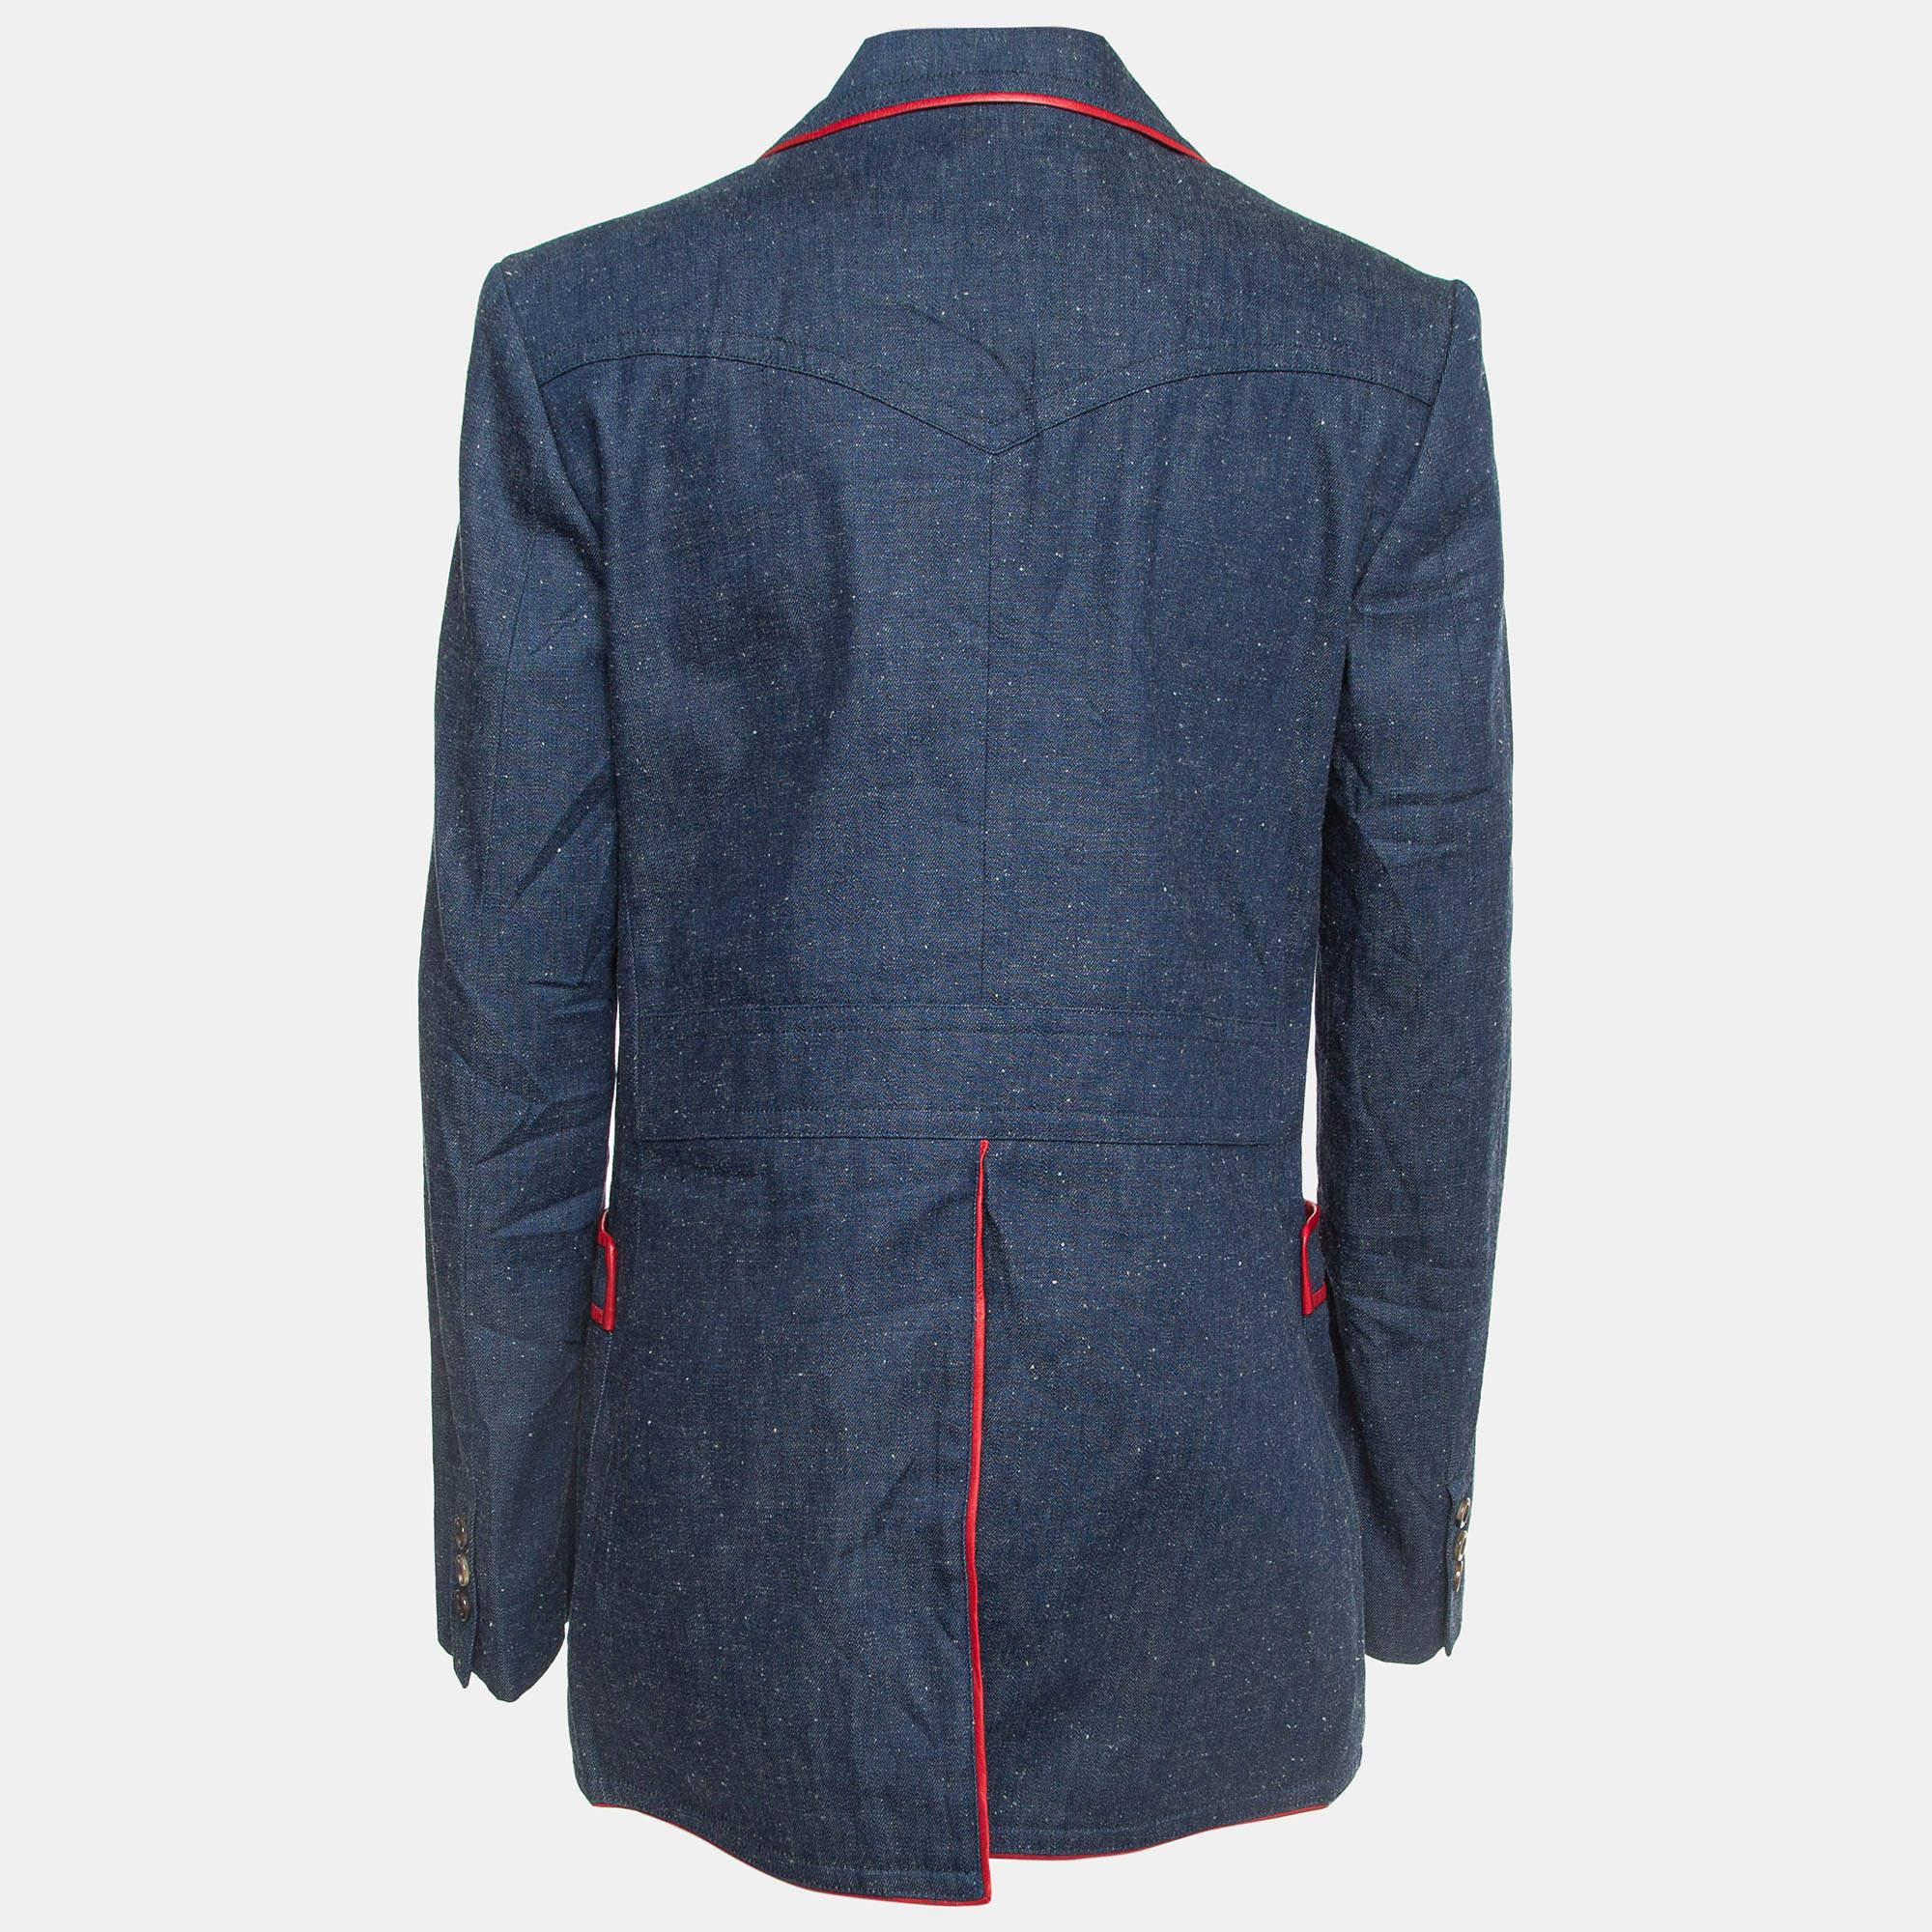 The Gucci blazer embodies sophistication with its sleek design and impeccable craftsmanship. Crafted from high-quality denim, it features luxurious leather trims, adding a touch of elegance to its classic single-breasted silhouette. Ideal for